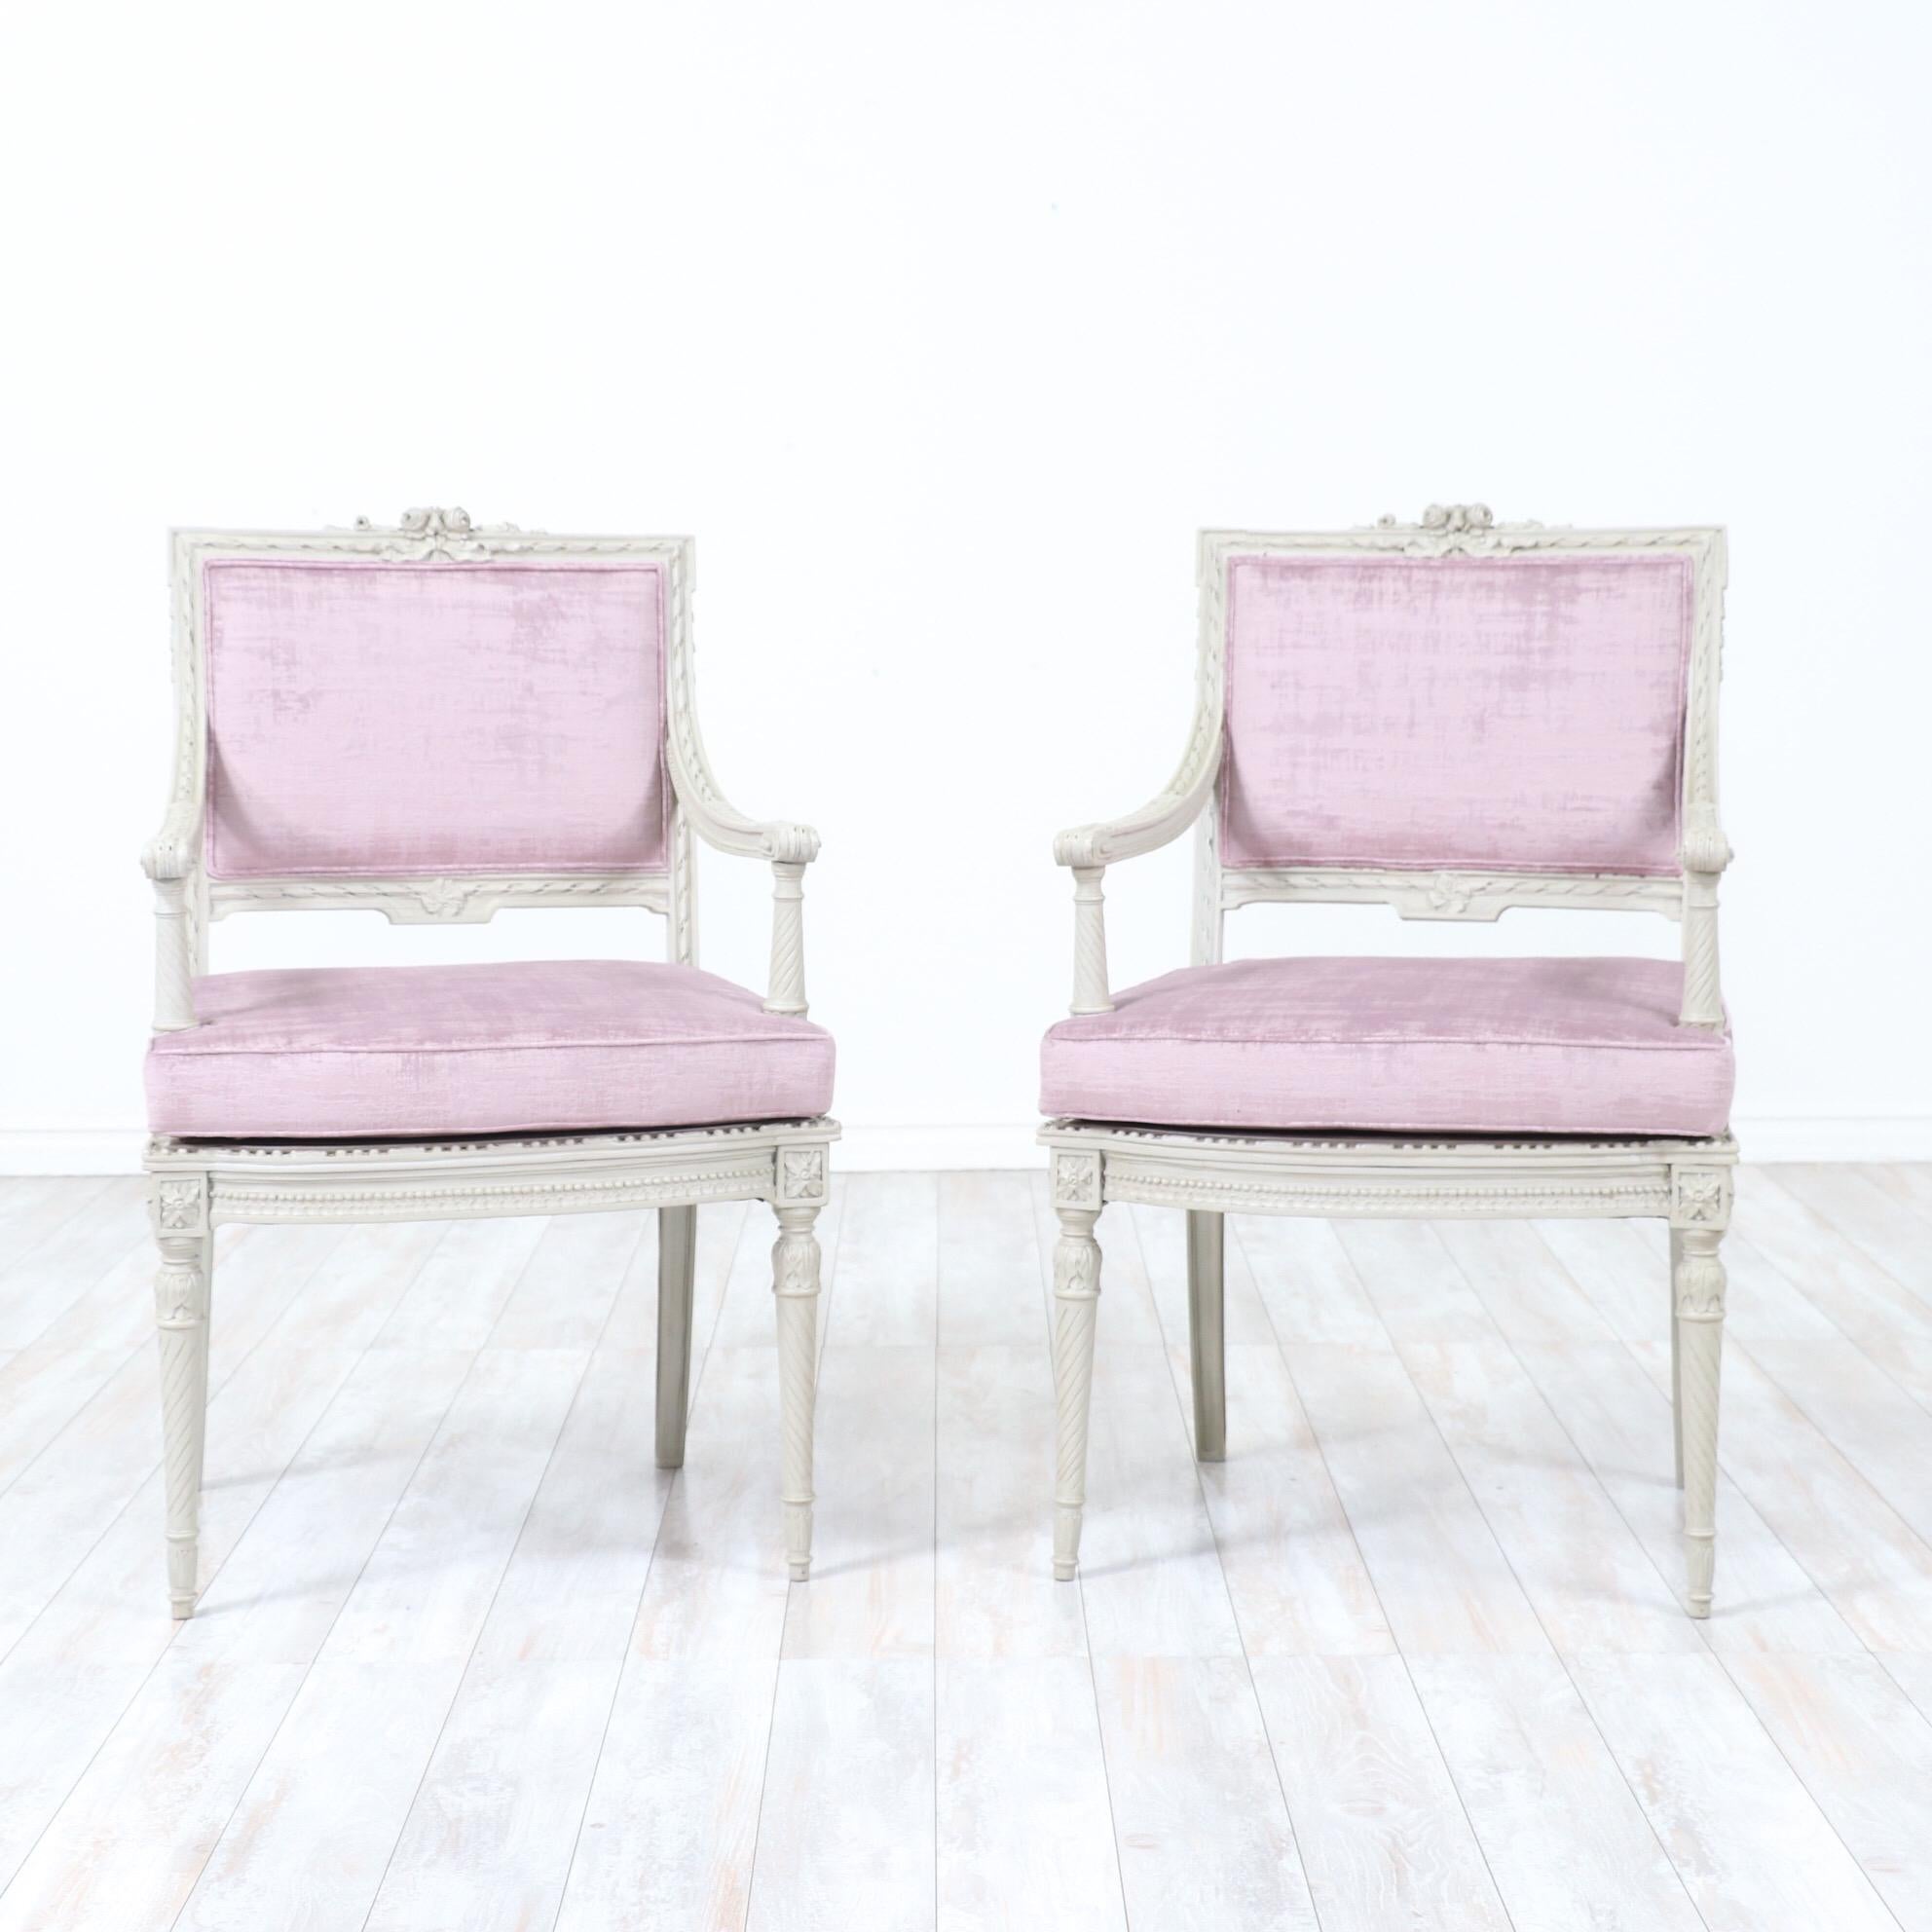 Gorgeous, French 1920s pair of armchairs in the Louis XVI style.

These beautiful chairs feature delicately carved wooden frames in a greige paint finish, new textured velvet upholstery, loose seat cushions and self welt details.

These chairs